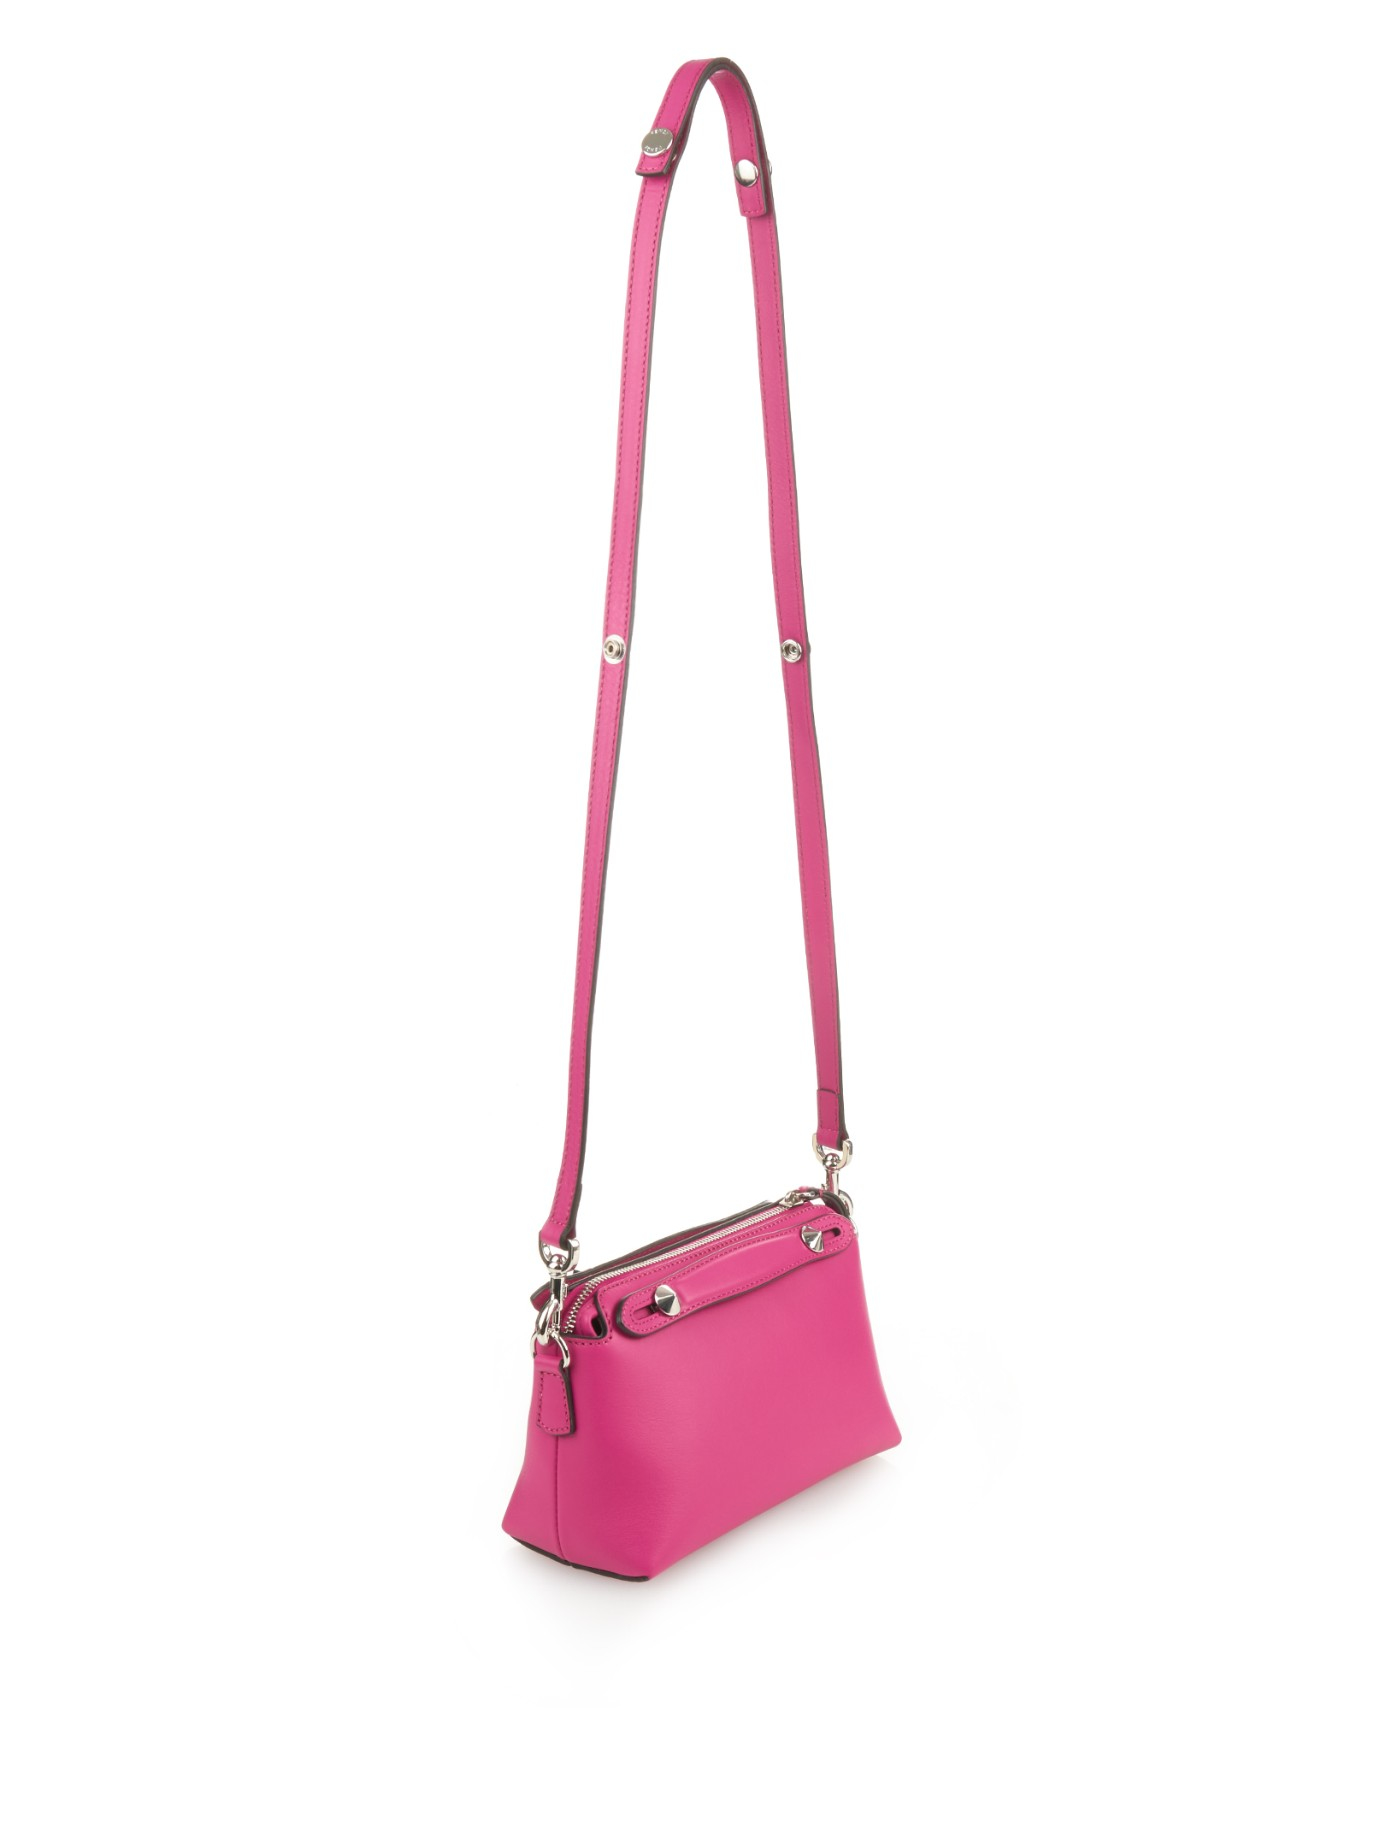 Lyst - Fendi By The Way Mini Leather Cross-Body Bag in Pink